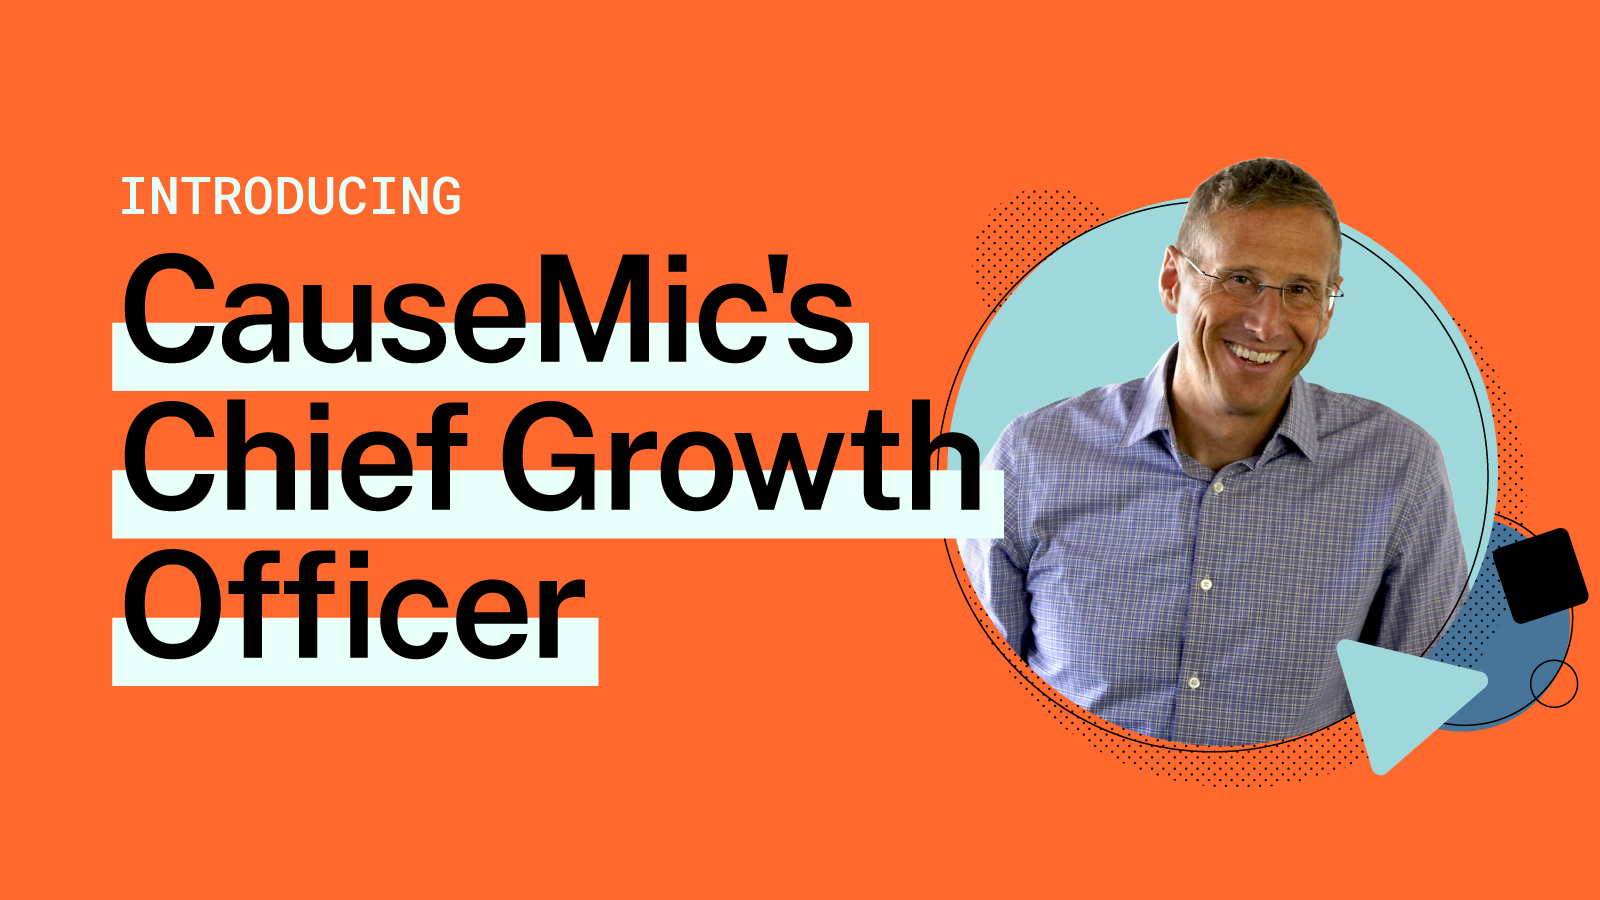 Introducing Brian August: Catalyst for Growth and Impact at CauseMic